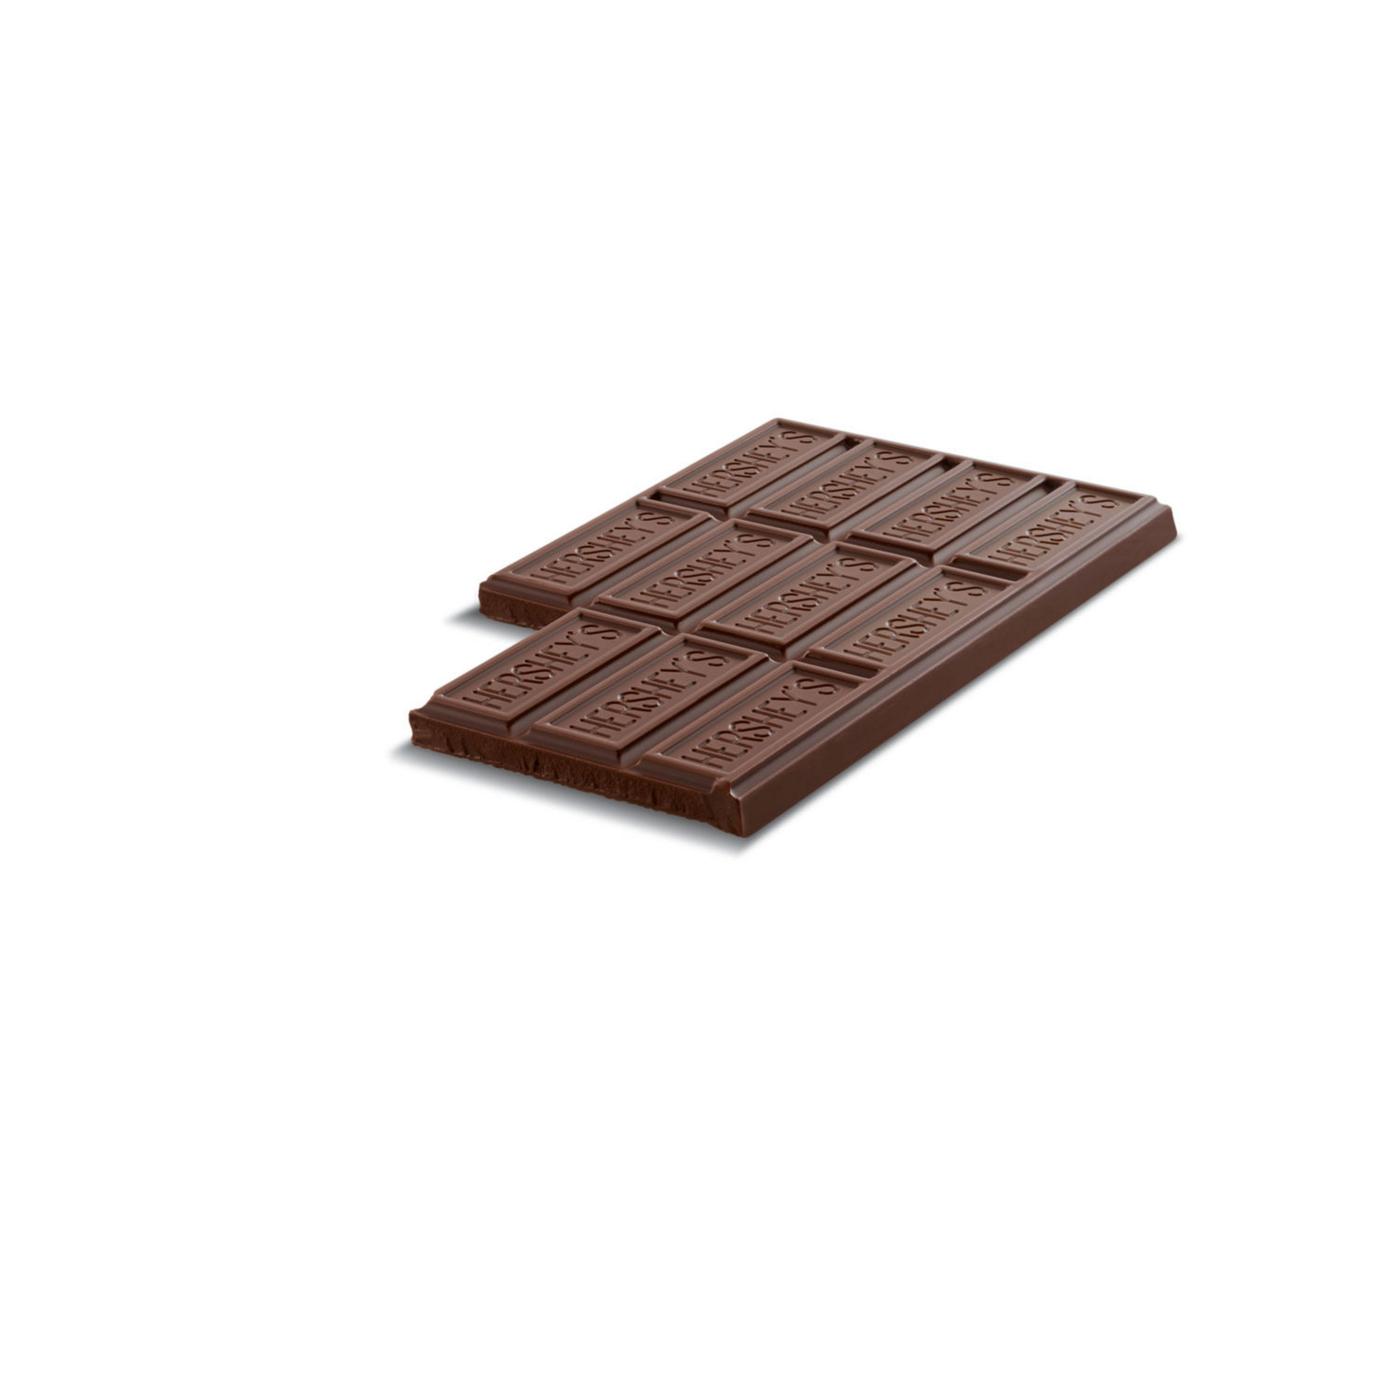 Hershey's Special Dark Mildly Sweet Chocolate XL Candy Bar; image 2 of 4